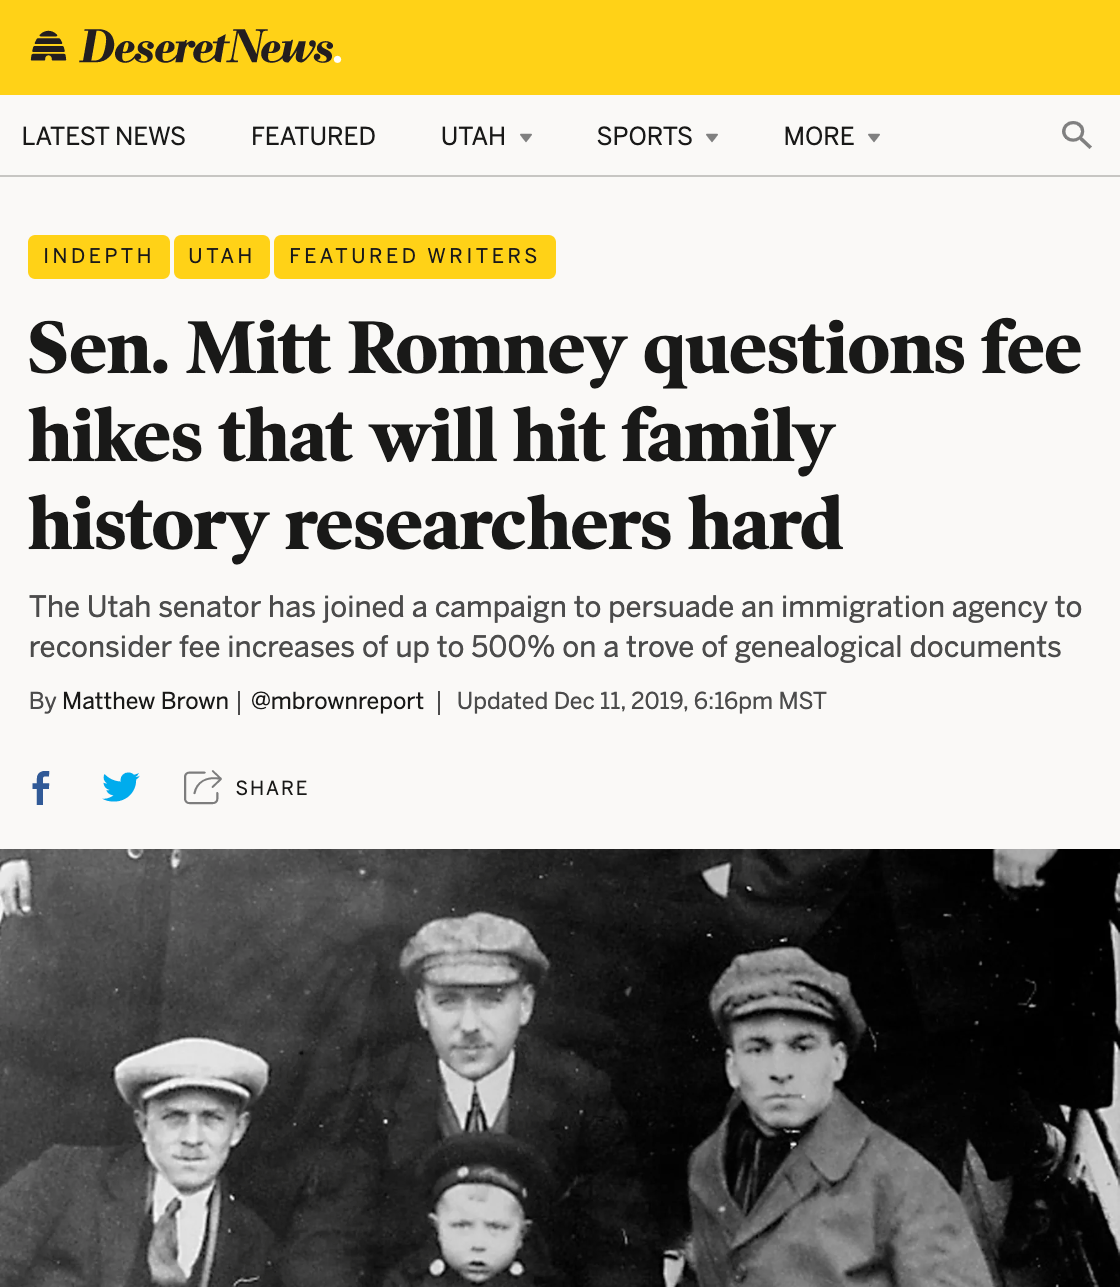 Sen. Mitt Romney questions fee hikes that will hit family history researchers hard